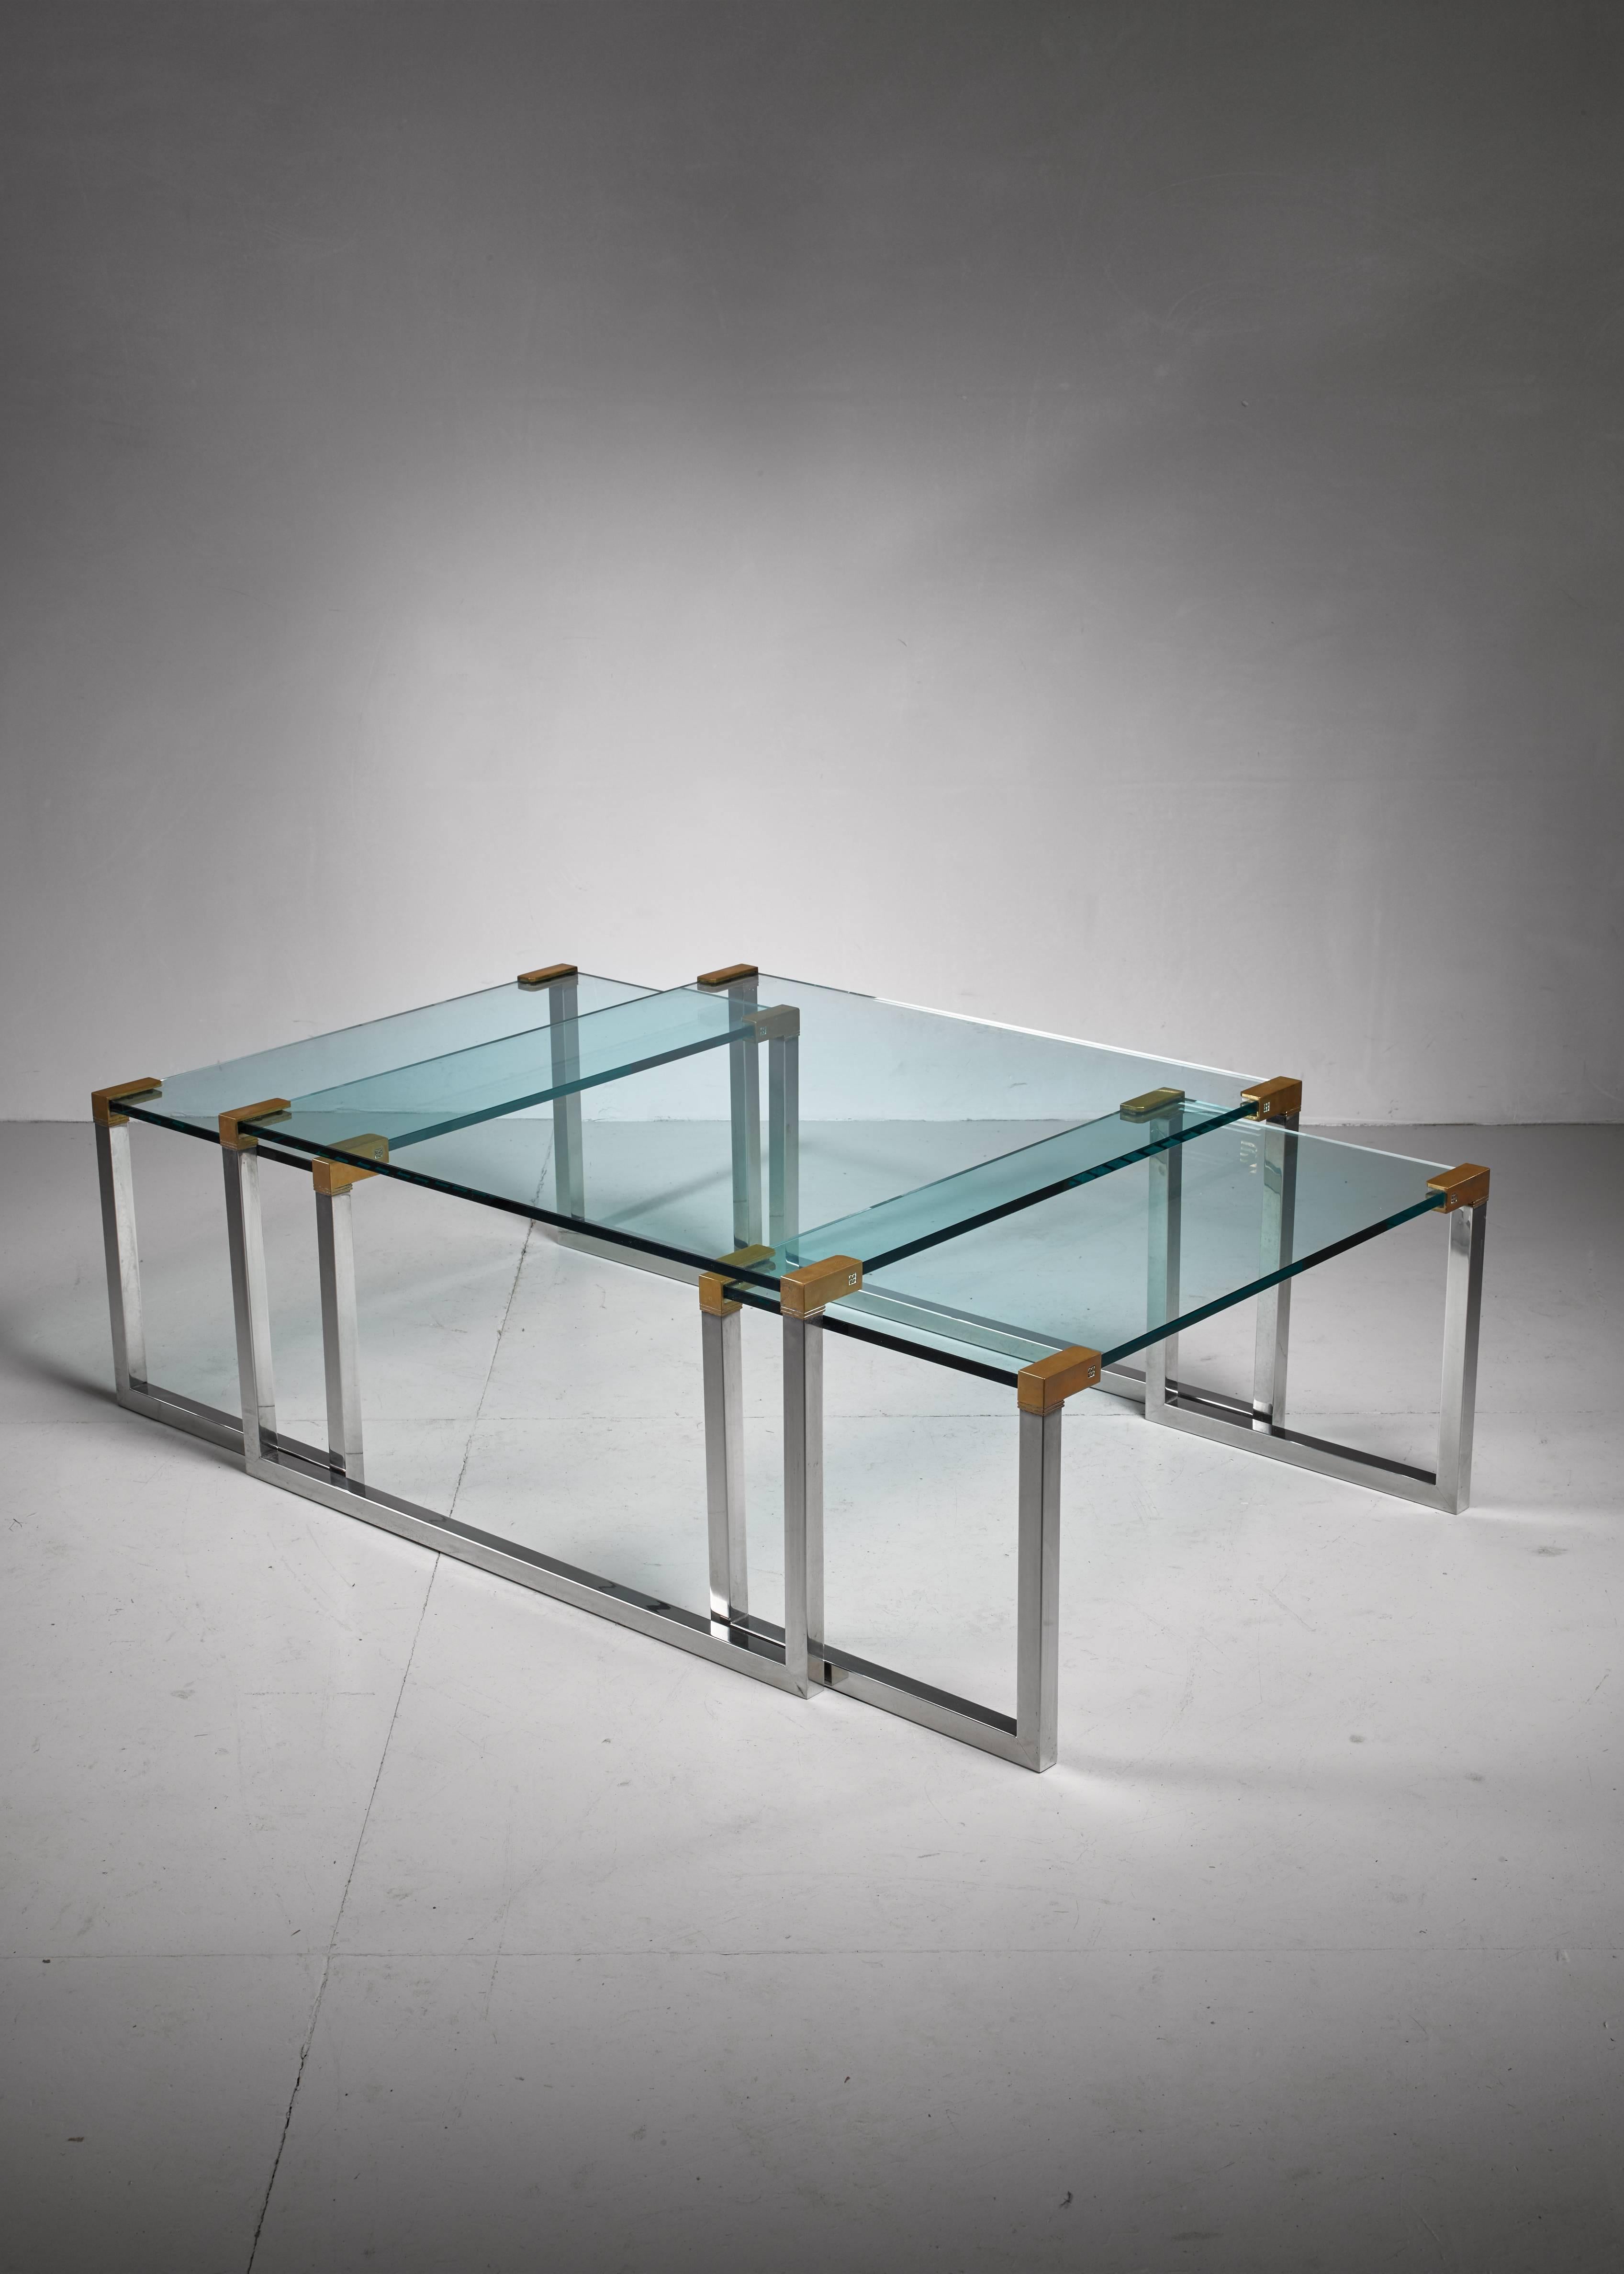 A set of three modular side or coffee tables by Dutch-Hungarian designer Peter Ghyczy. The tables are made of a chrome and brass frame with a glass top.

The measurements stated are of the large table. The two smaller tables are 45 by 83 cm and 42